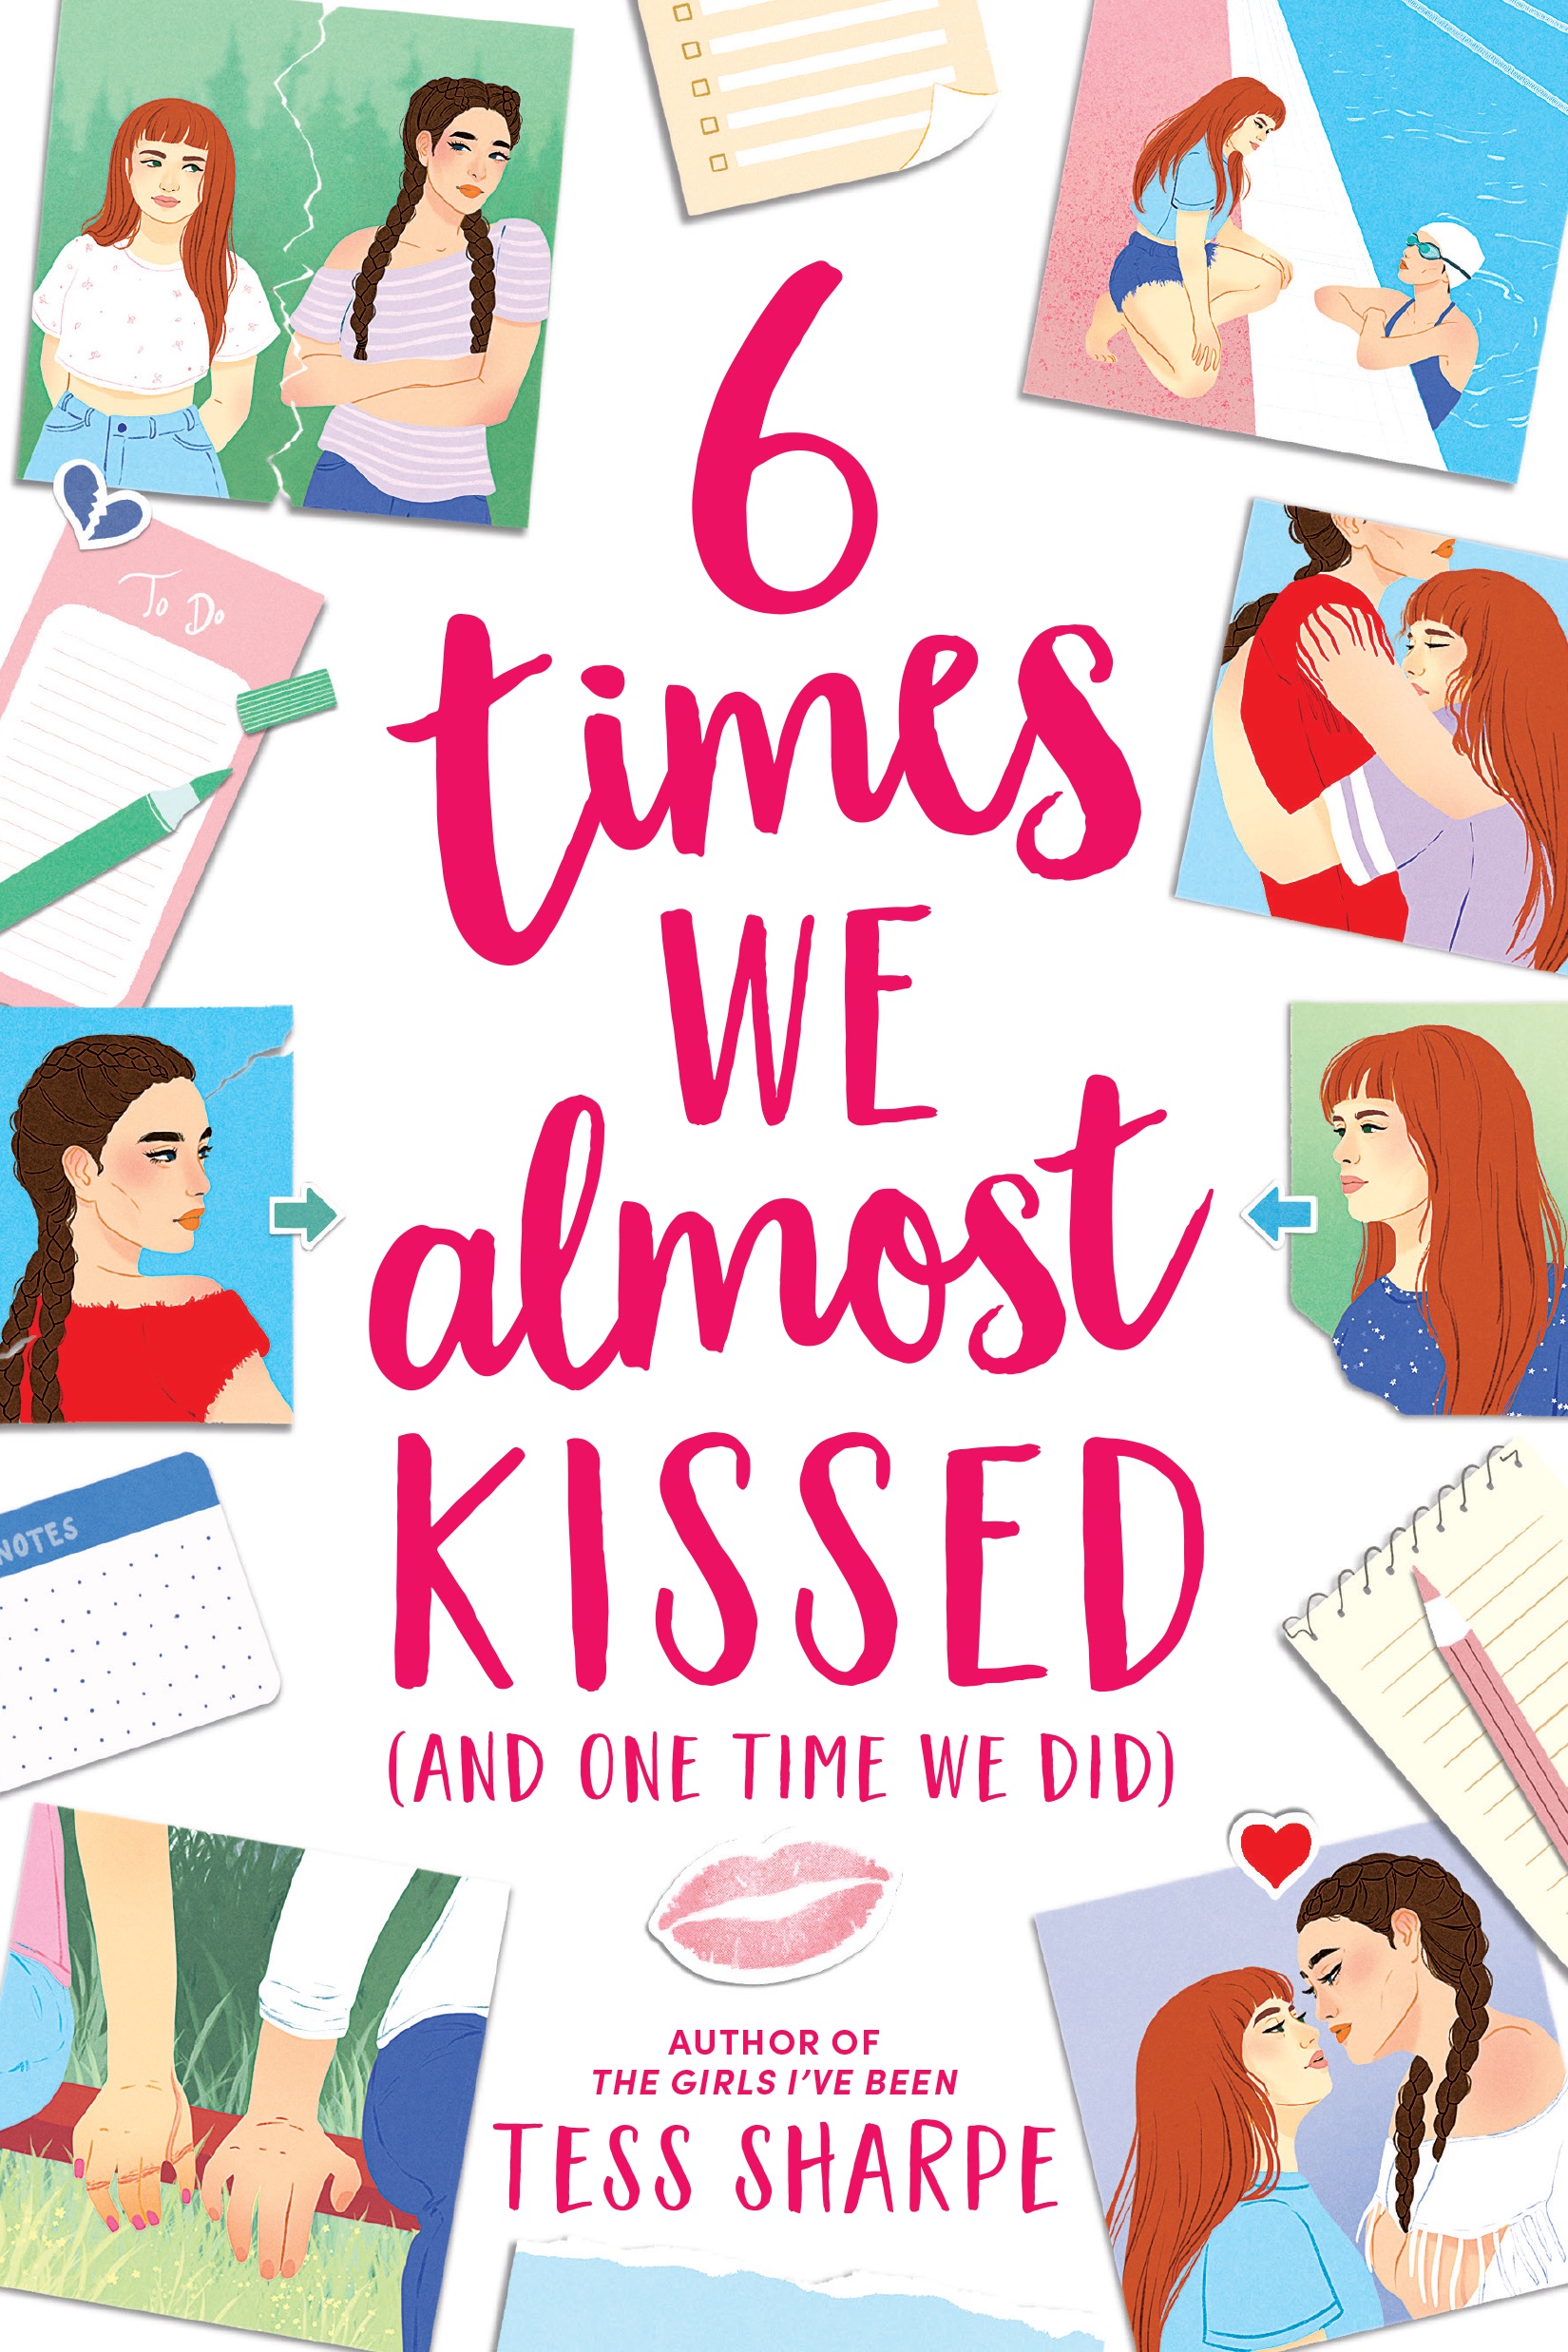 Author Chat With Tess Sharpe (6 Times We Almost Kissed [And One Time We Did]), Plus Giveaway! ~ US Only!